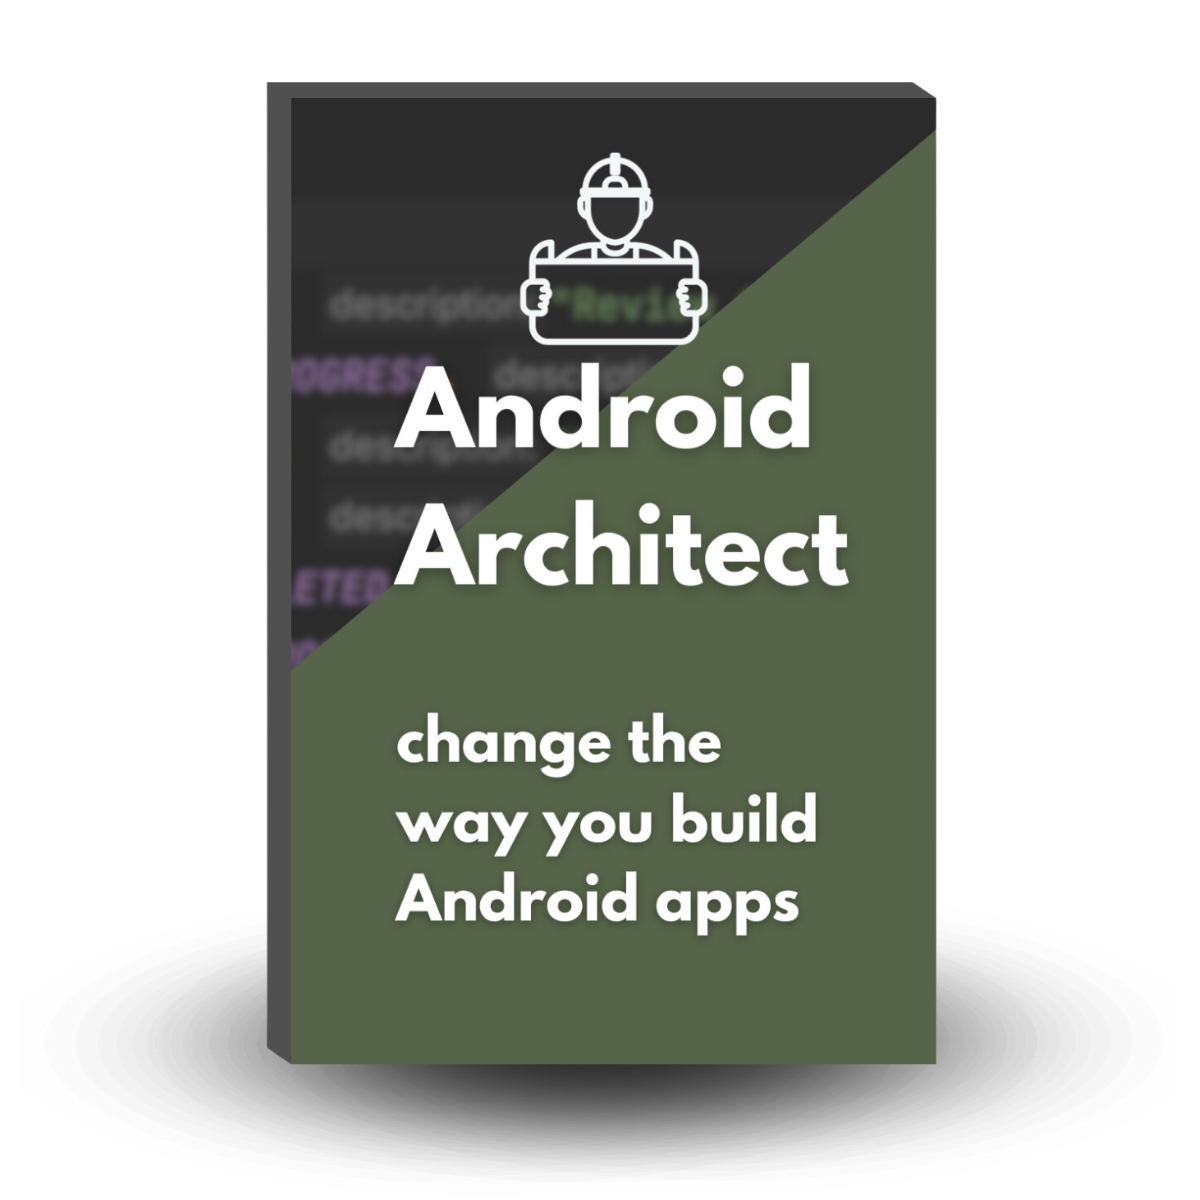 Android Architect